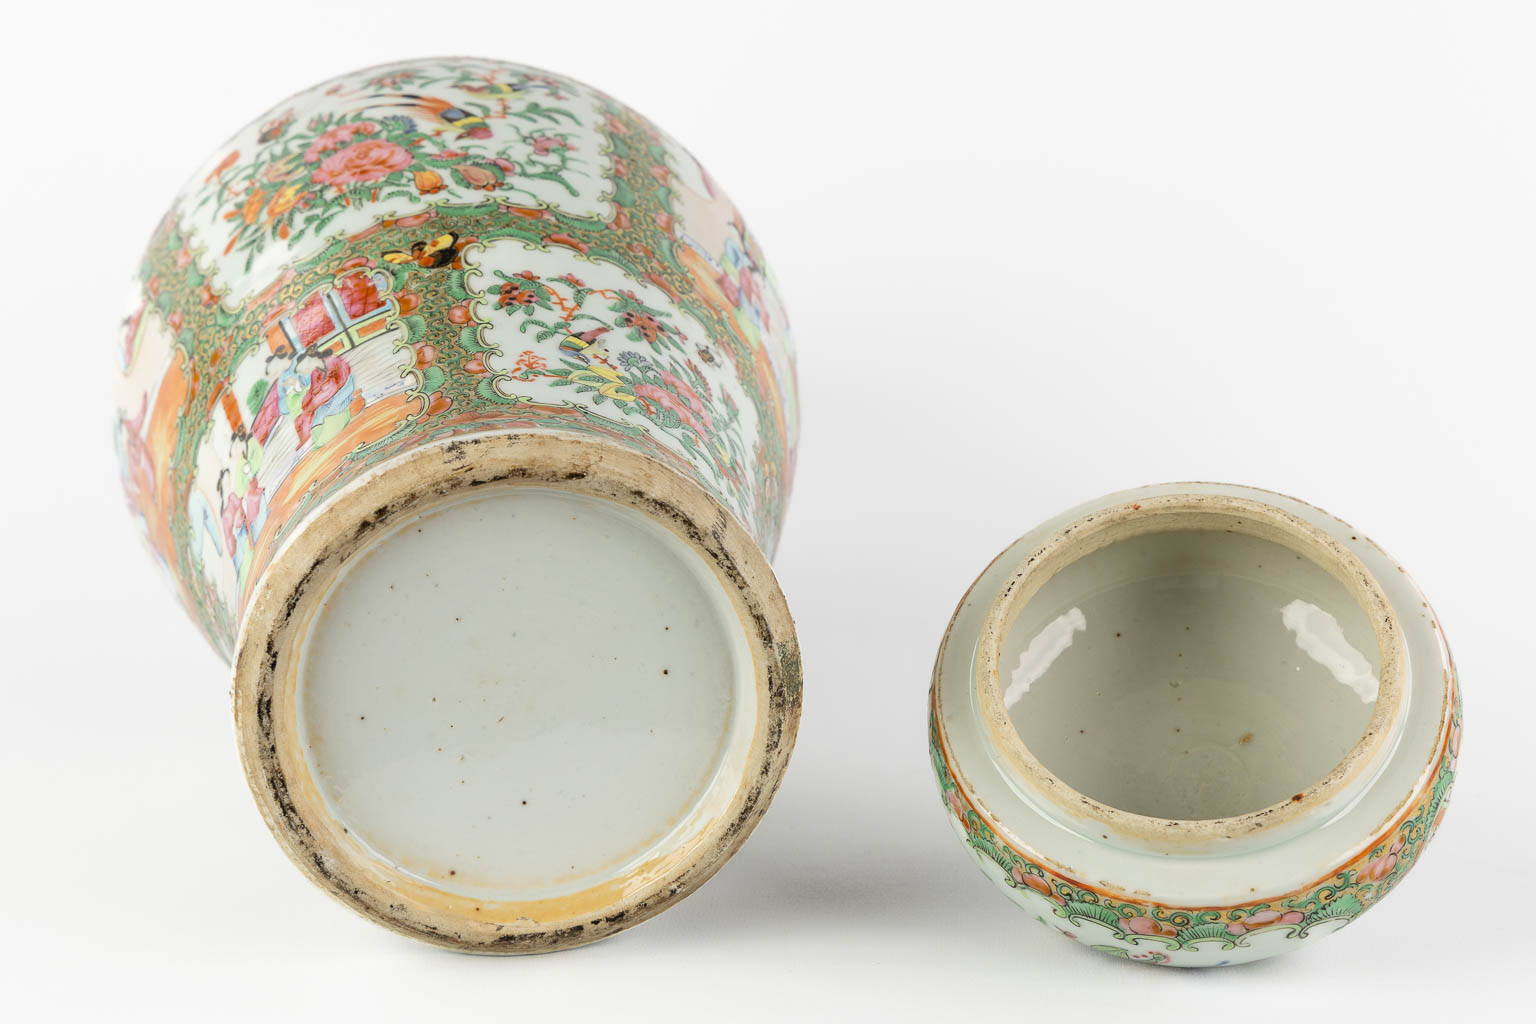 A Chinese Canton vase with a lid, interior scnes with figurines, fauna and flora. 19th/20th C. (H:4 - Image 10 of 19